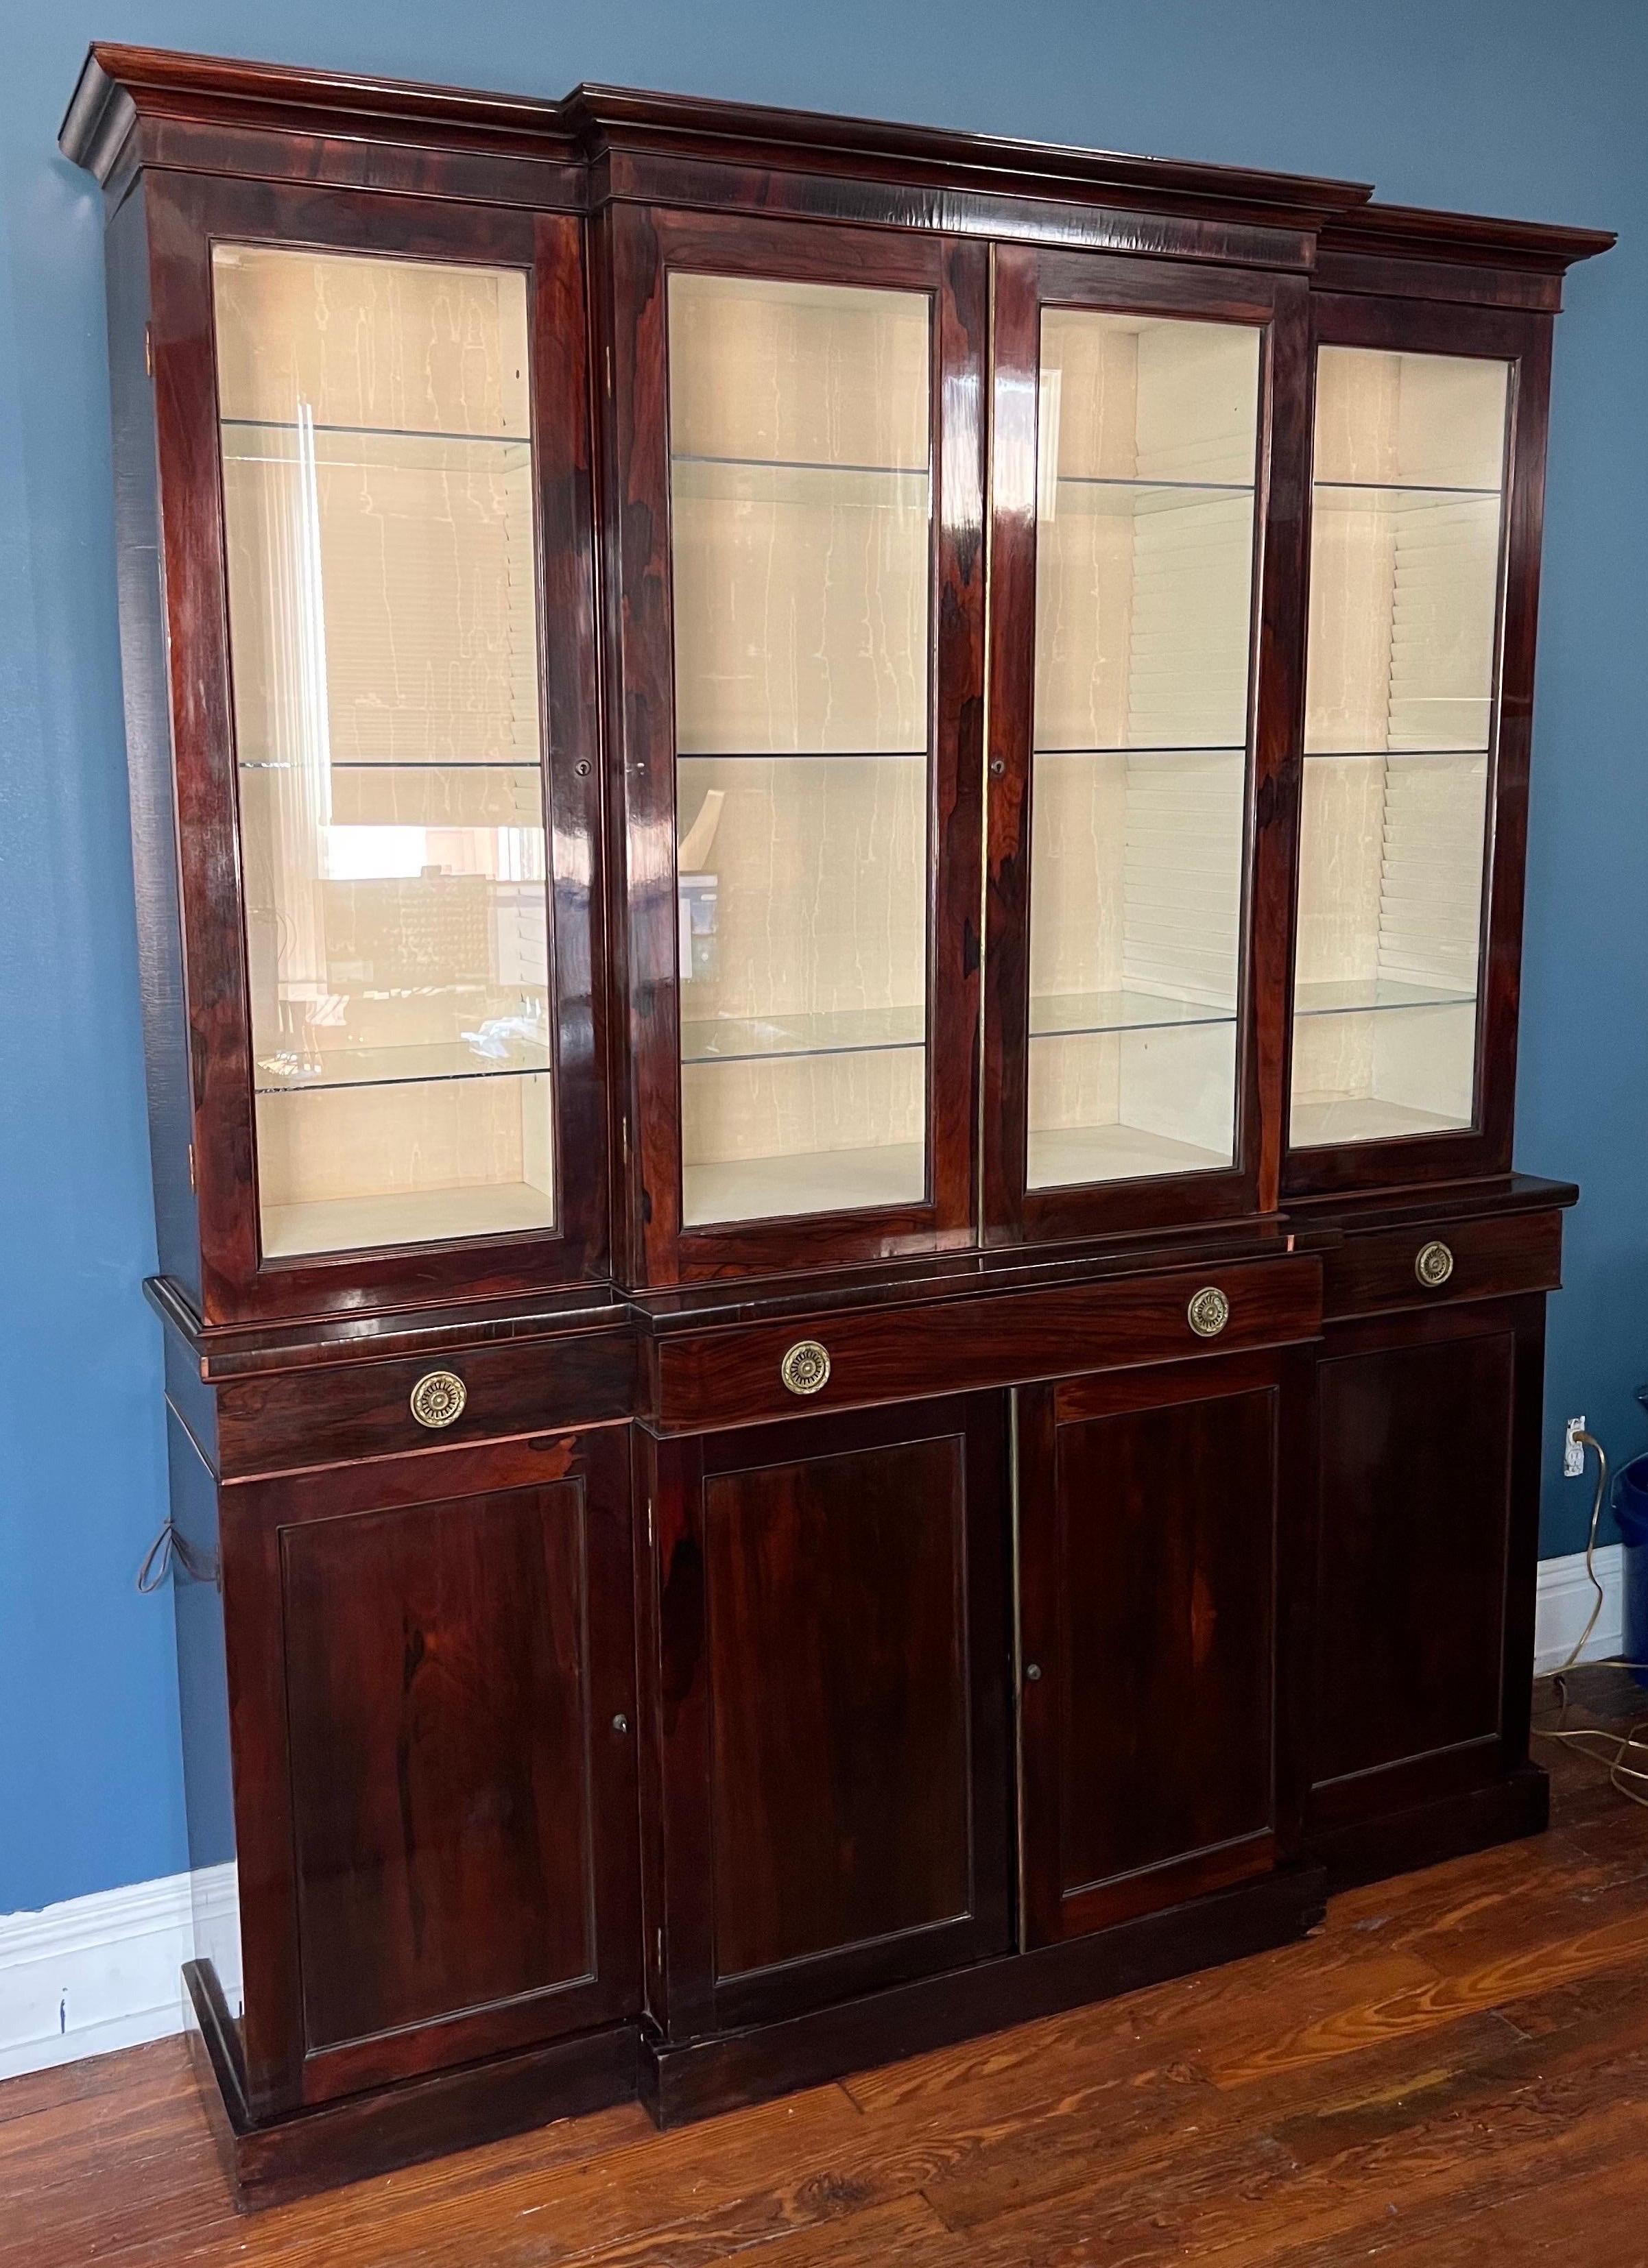 Regency 19th Century English Rosewood Breakfront Bookcase with Hidden Drawers For Sale